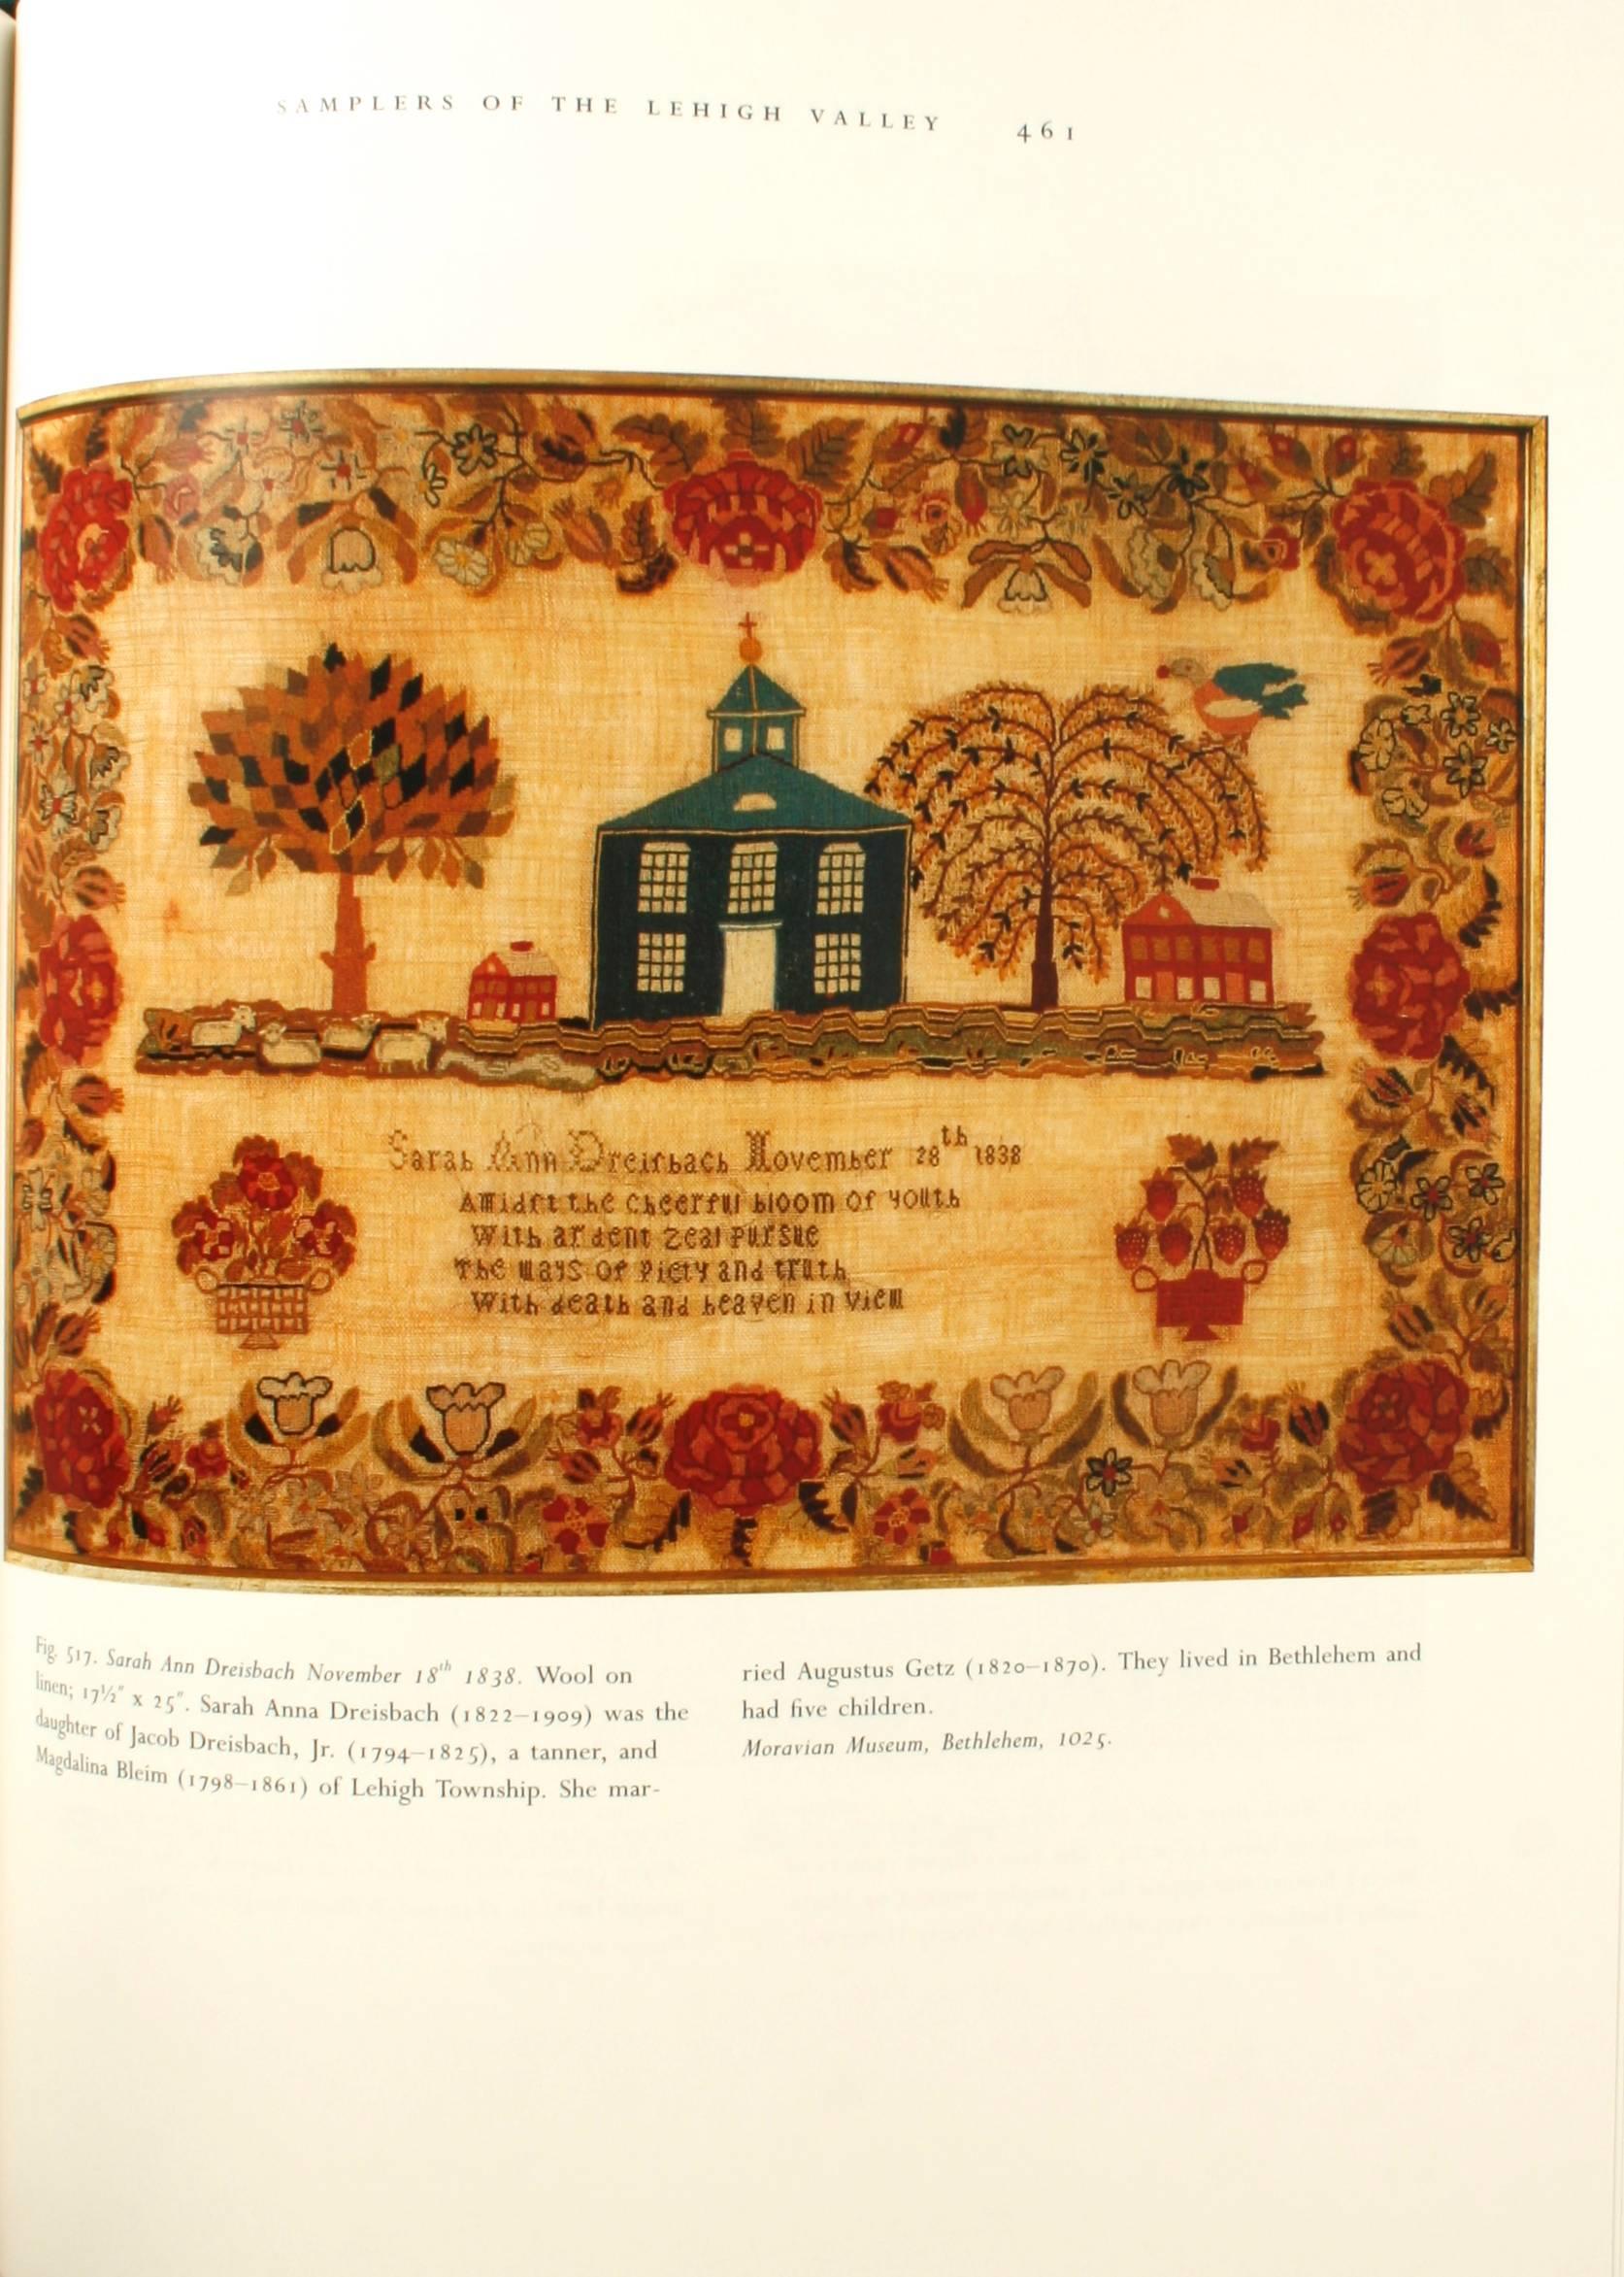 Paper Girlhood Embroidery, American Samplers and Pictorial Needlework, 1650-1850